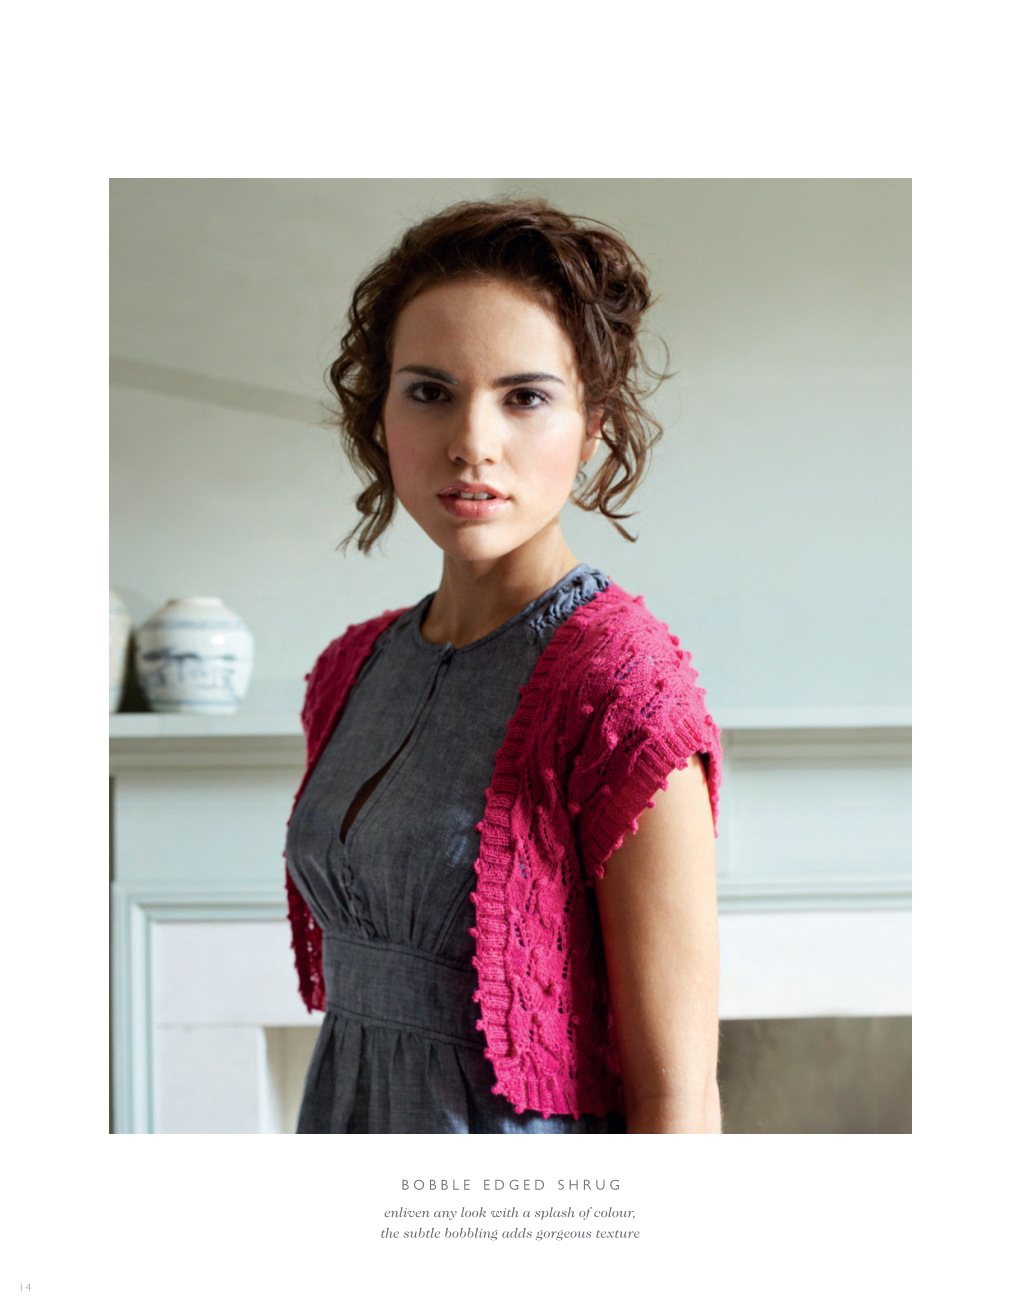 Bobble Edged Shrug Enliven Any Look with a Splash of Colour, the Subtle Bobbling Adds Gorgeous Texture